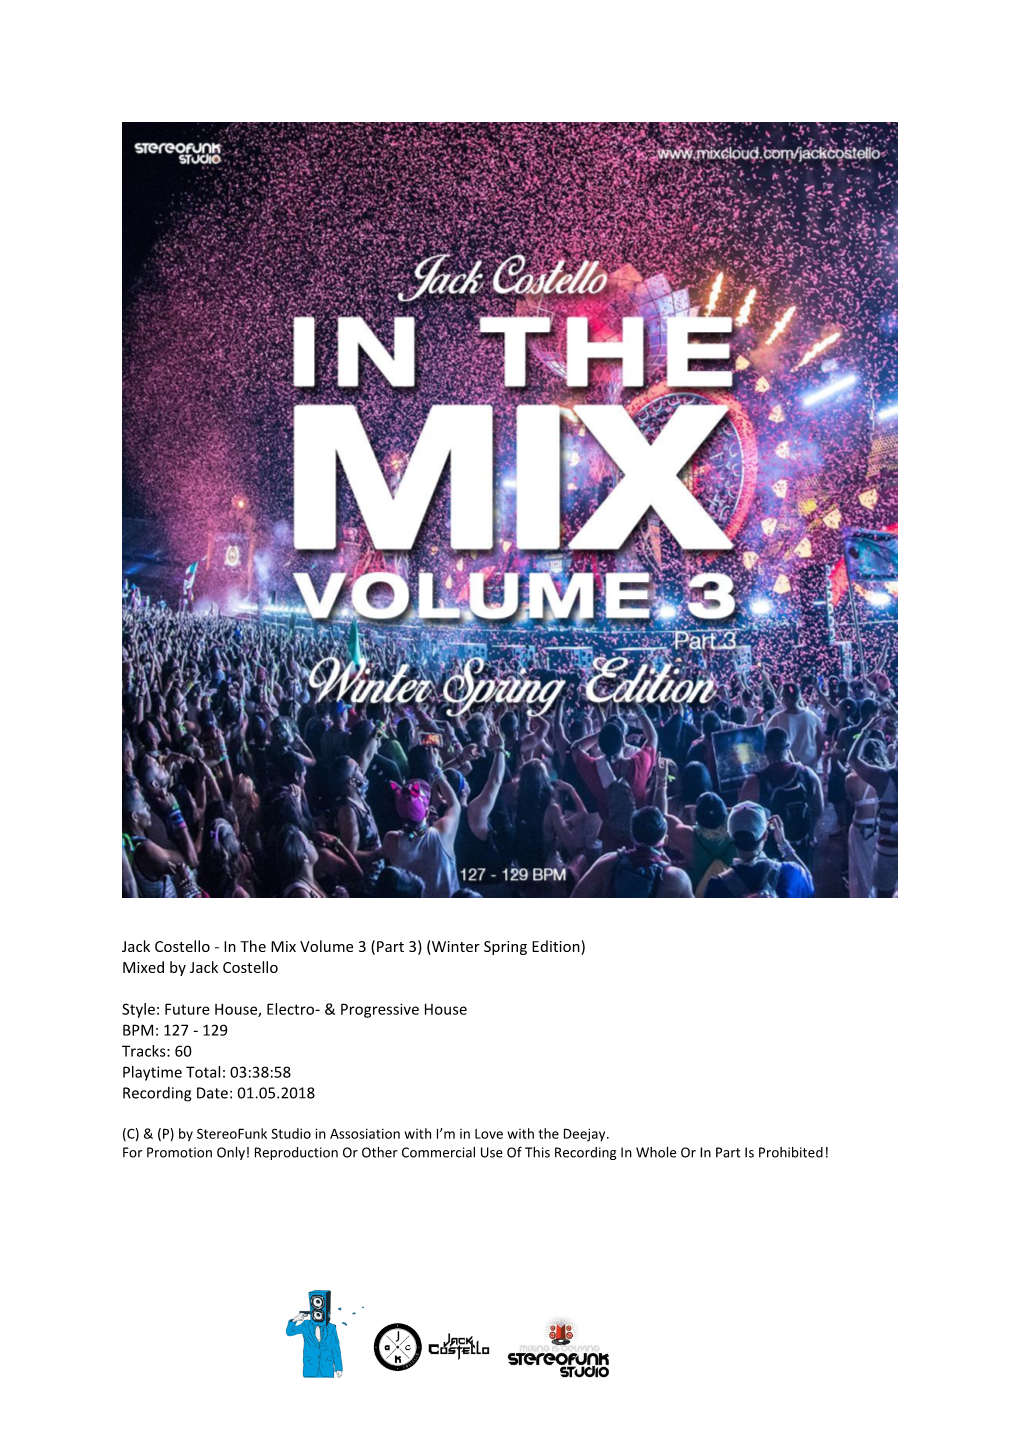 Jack Costello - in the Mix Volume 3 (Part 3) (Winter Spring Edition) Mixed by Jack Costello